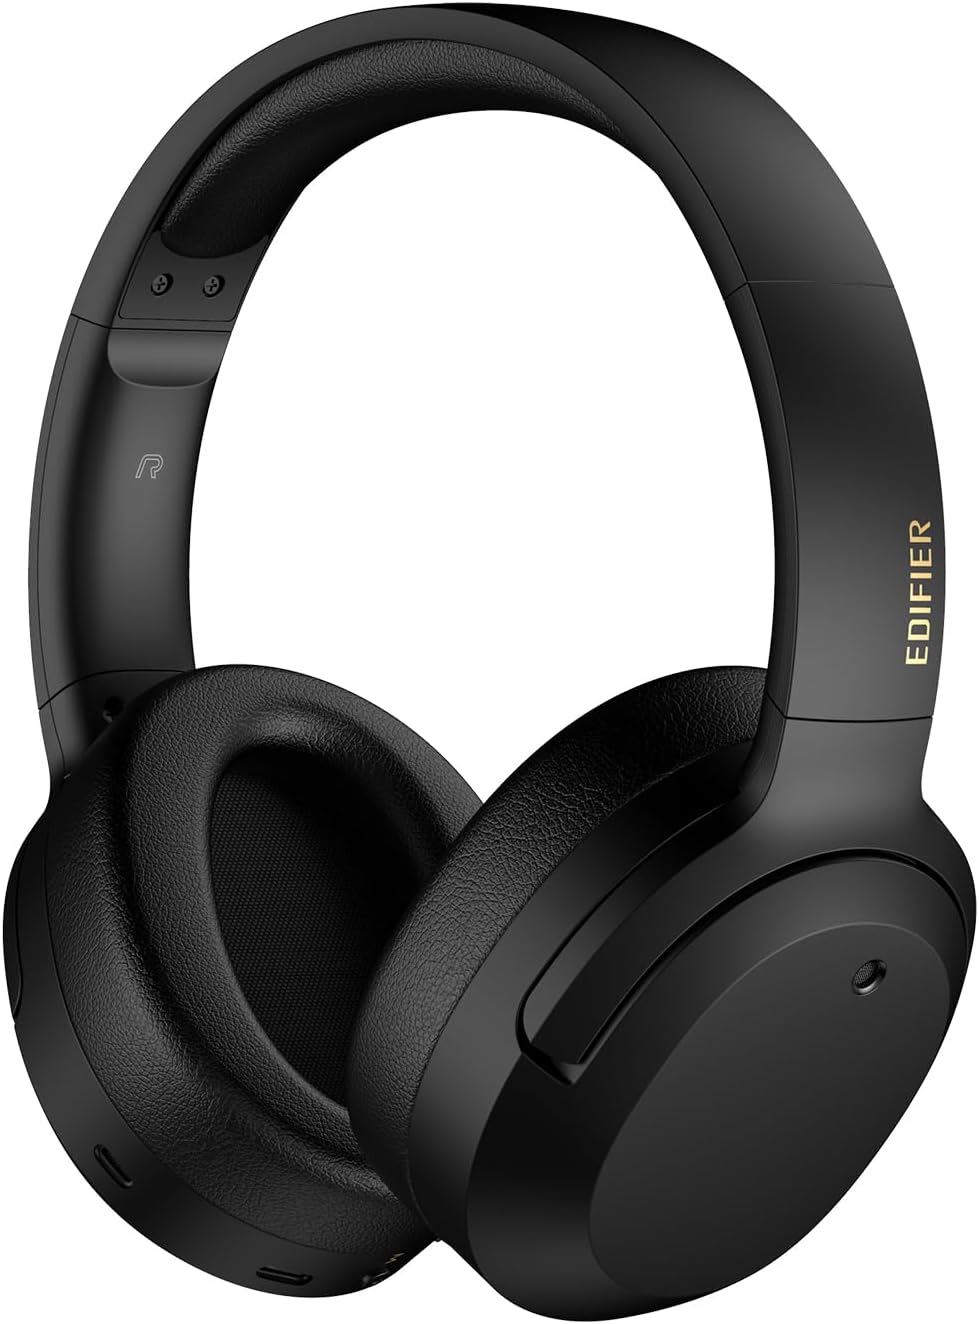 Edifier W820NB Plus Hybrid Active Noise Cancelling Headphones - LDAC Codec - Hi-Res Audio Wireless & Wired - Fast Charge - Over Ear Bluetooth V5.2 Headphones for Travel/Home/Office- Ivory